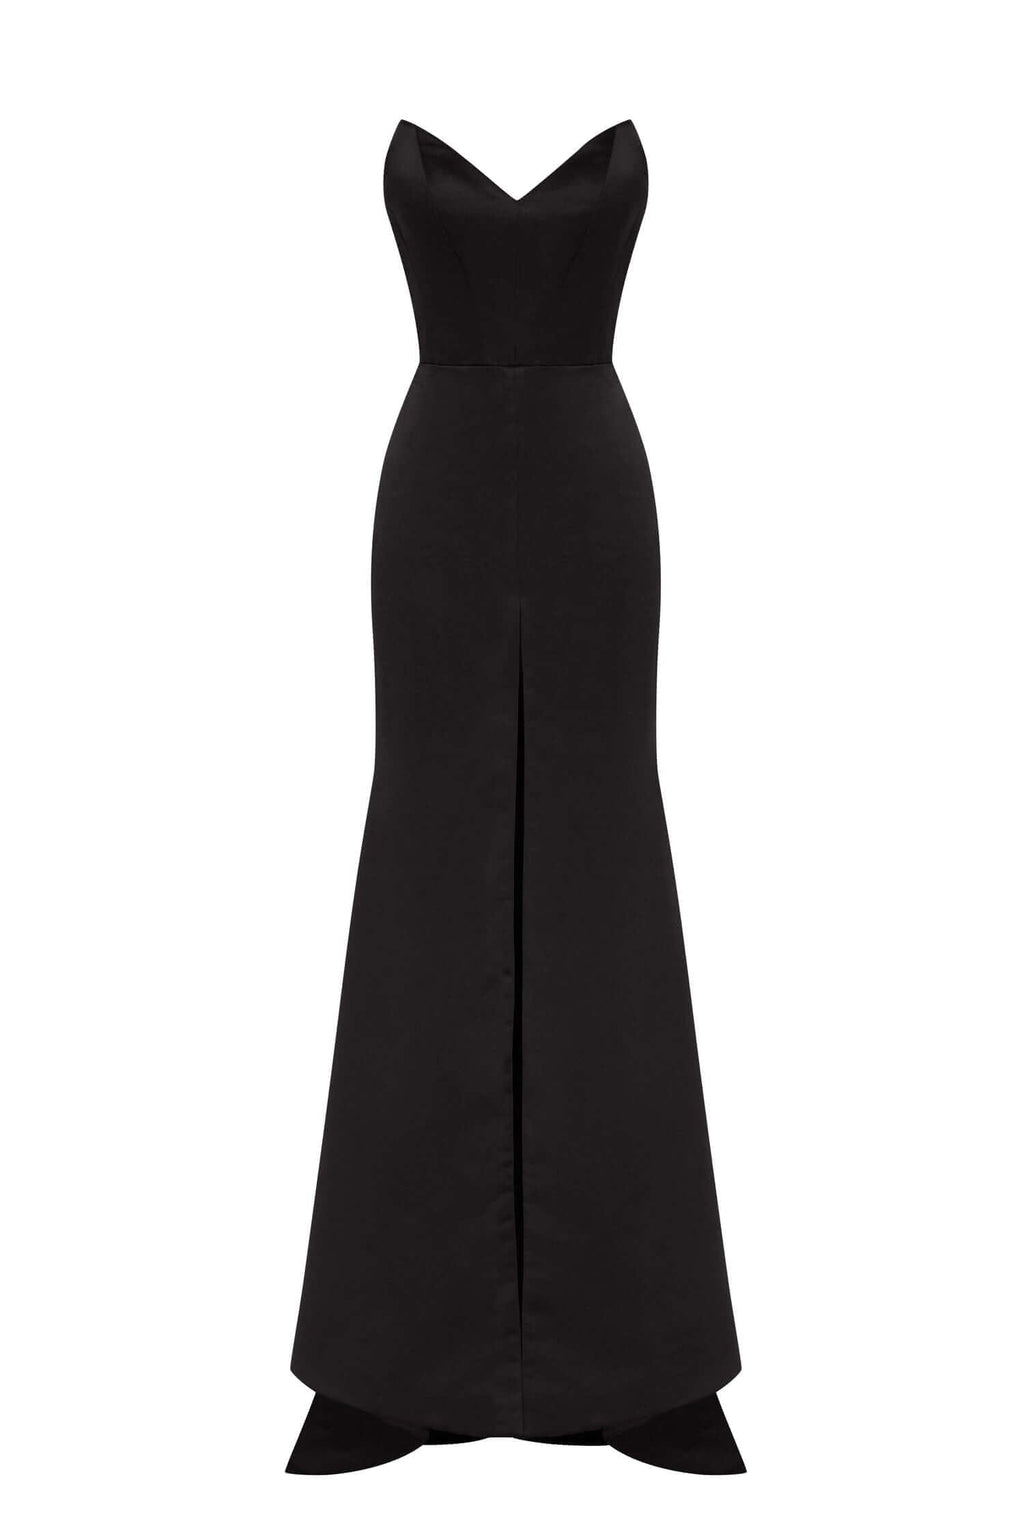 Black Strapless evening gown with thigh slit ➤➤ Milla Dresses